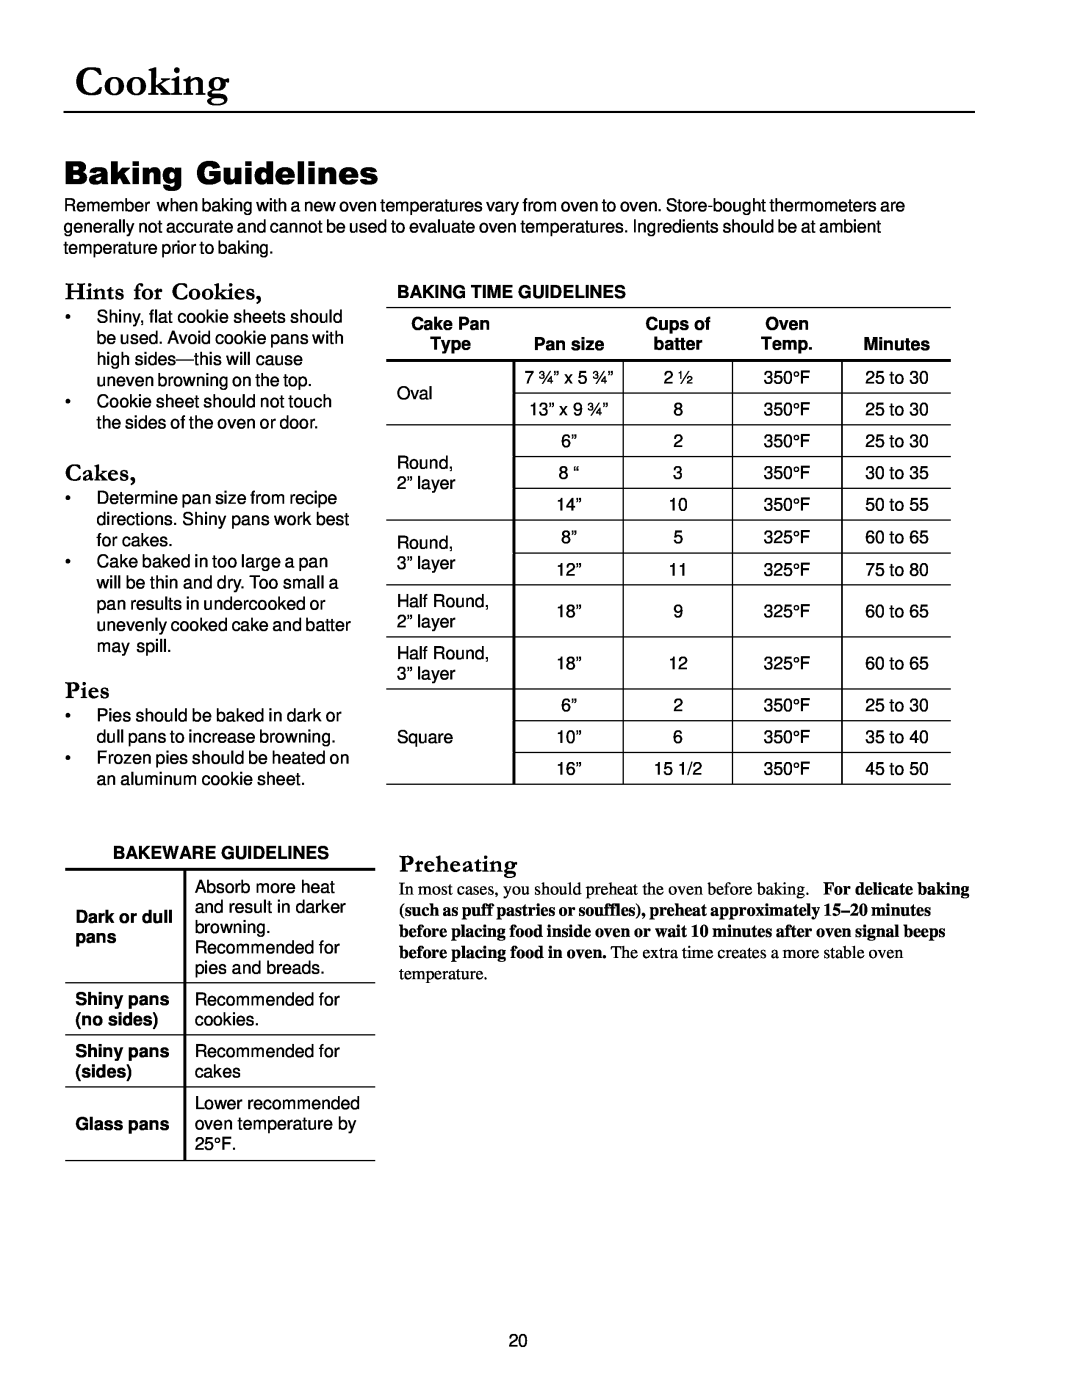 Amana ACM1580A Baking Guidelines, Hints for Cookies, Cakes, Pies, Preheating, Cooking, Bakeware Guidelines, Dark or dull 